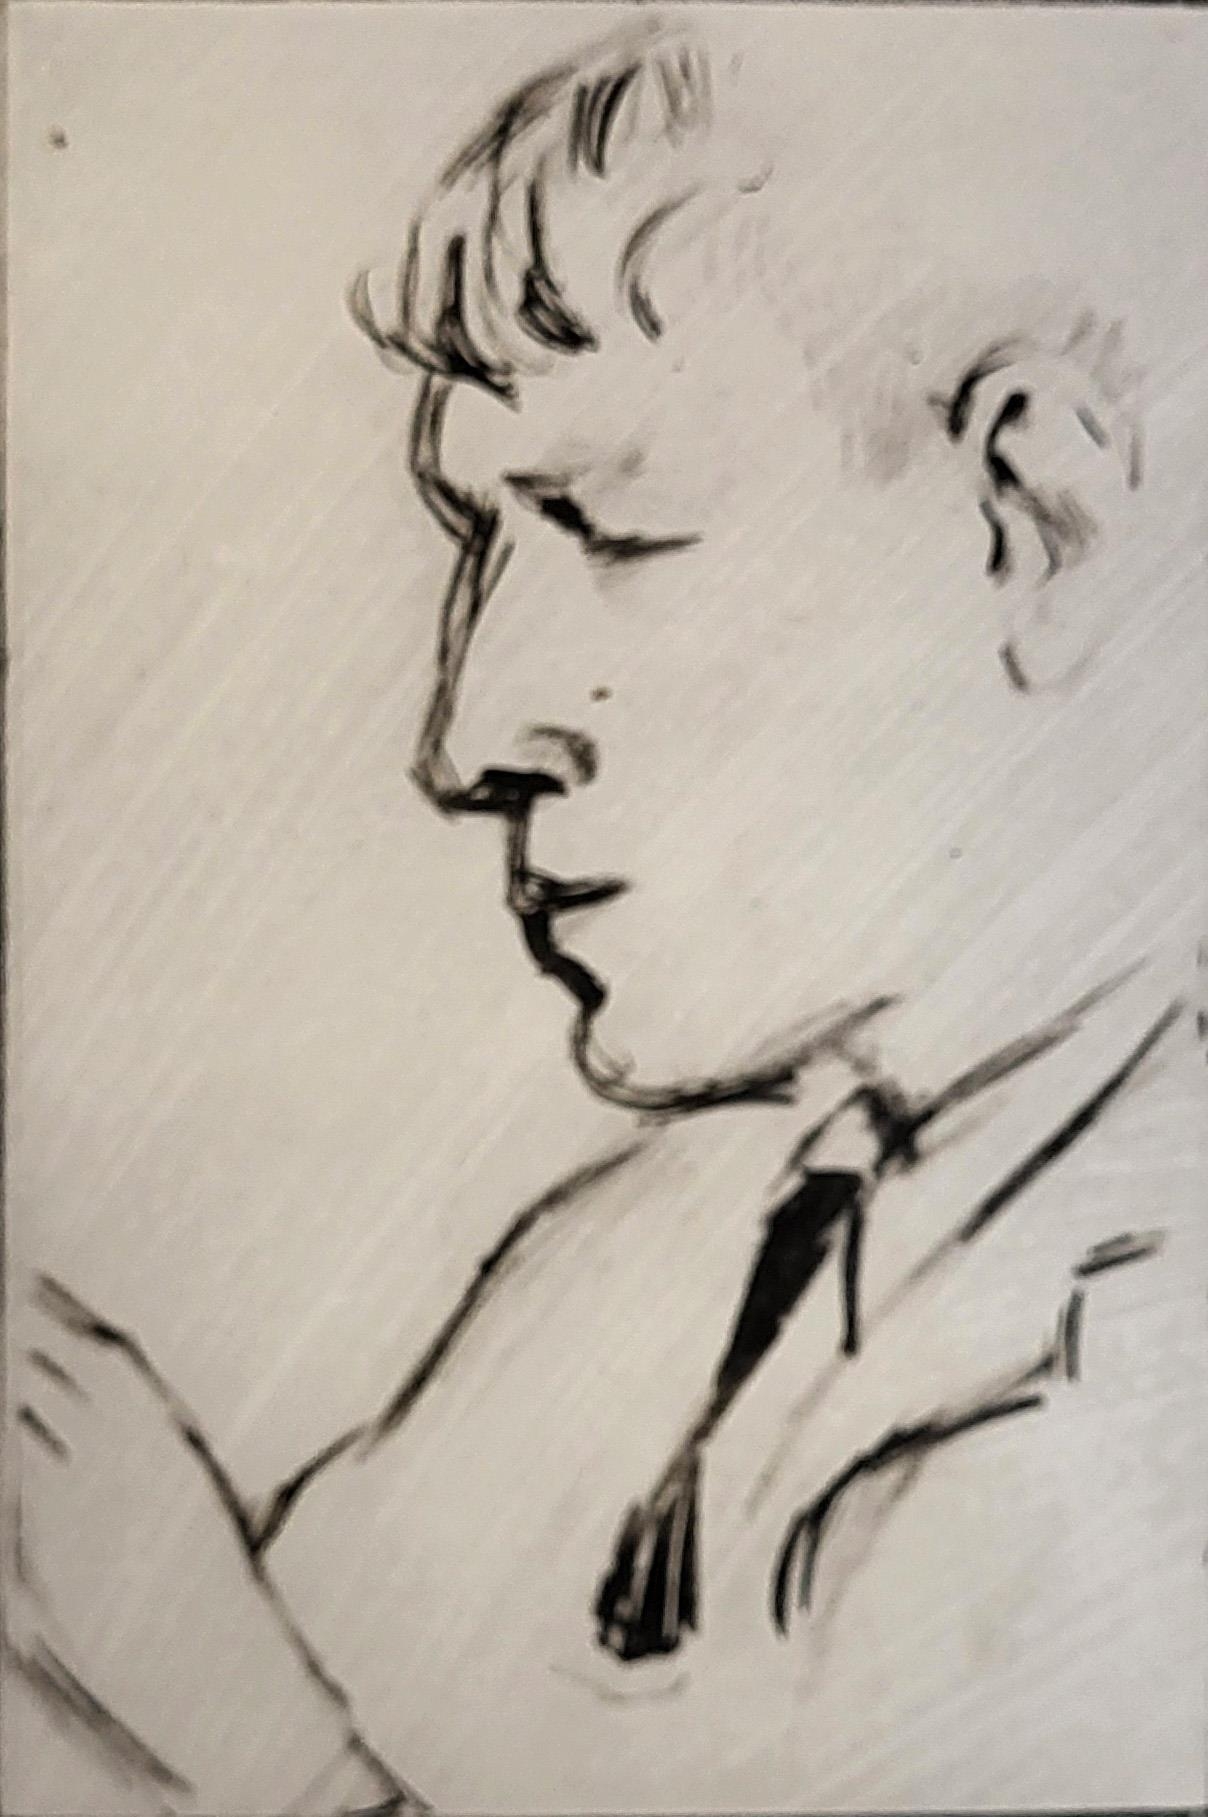 MAURICE FIELD, 1905 - 1998, ORIGINAL LITHOGRAPHIC ZINC PLATE OF W.H. AUDEN FOR THE LIMITED EDITION